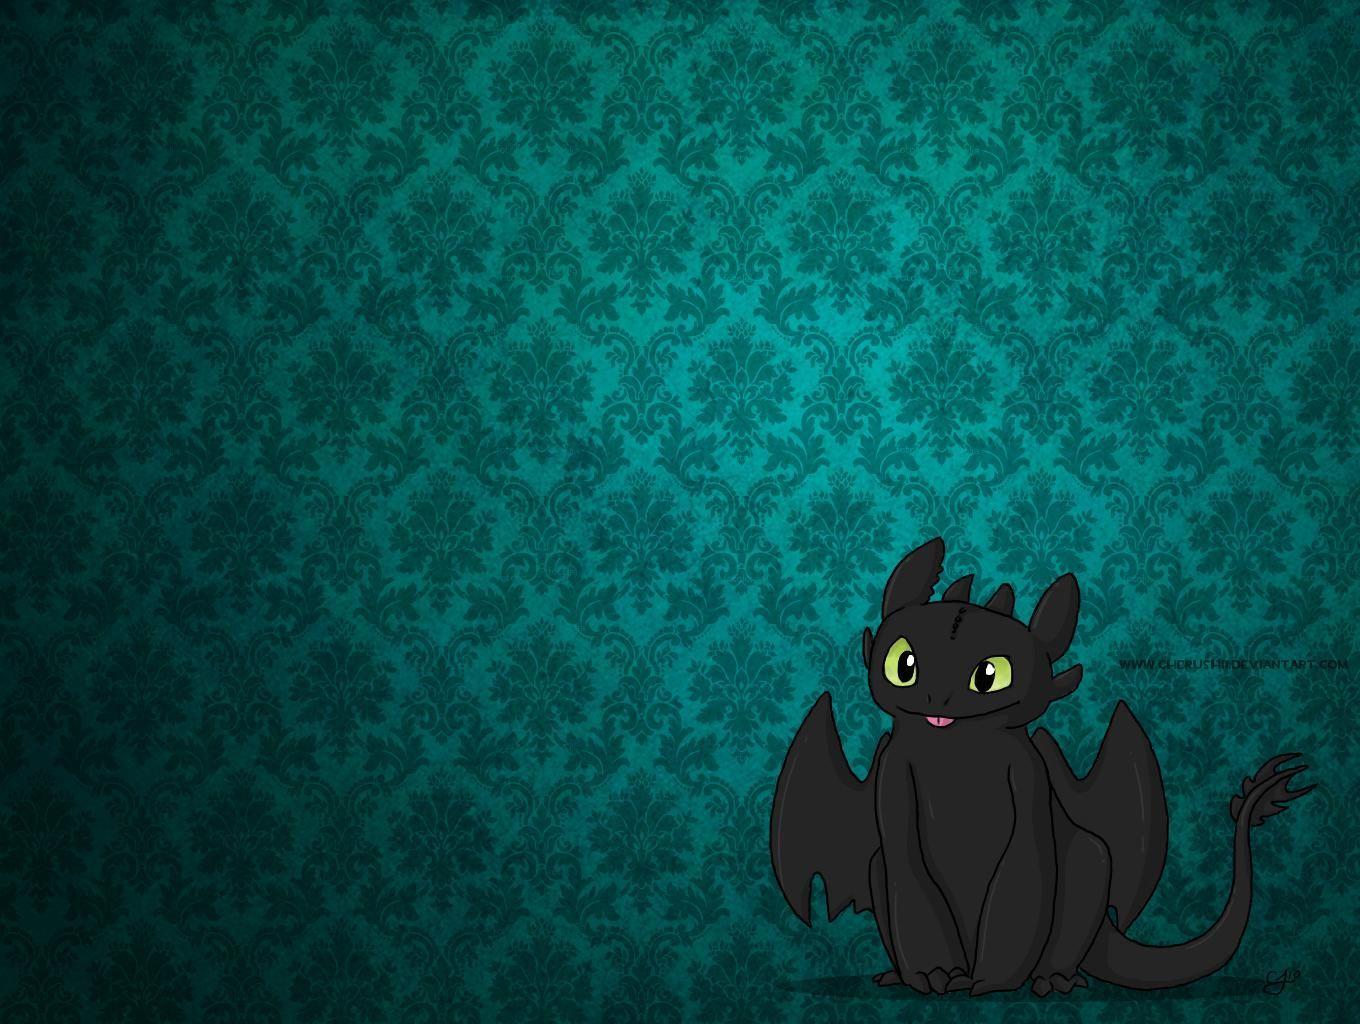 How to train your dragon♡♡. Toothless